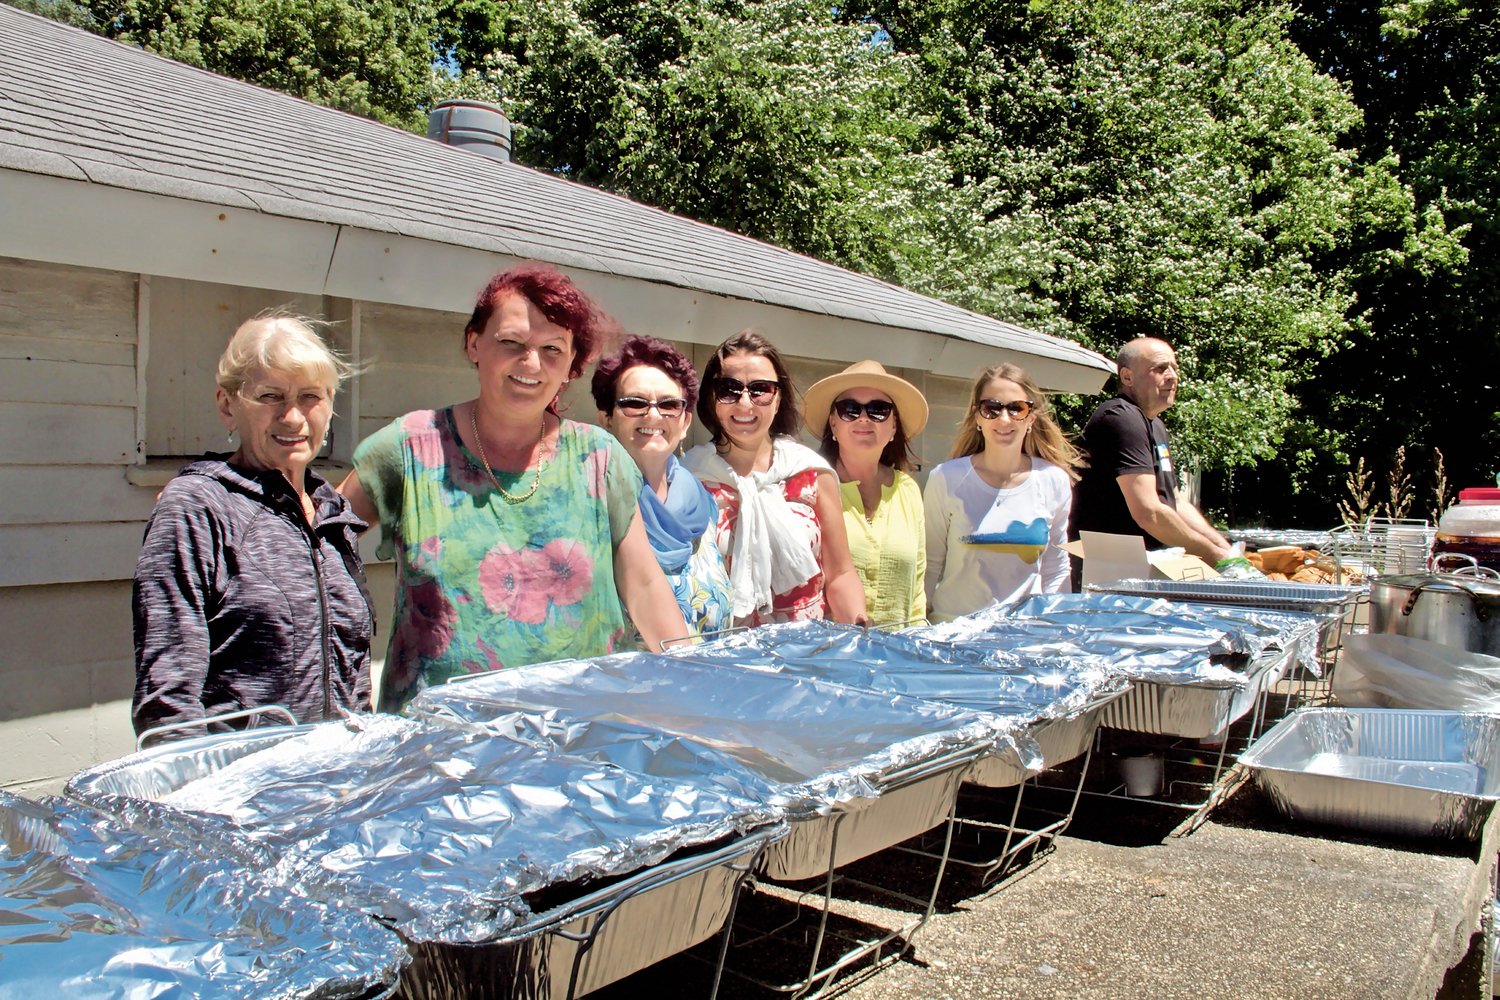 Maria Szherba, far left, Halyna Fenchenko, Anna Kijko, Ivanna Duda, Tetyana Komzuk and Iryna Bodnar were on hand to serve homemade Ukrainian food at the Father’s Day picnic at St. Josephat’s, a fundraiser for the war-torn country.